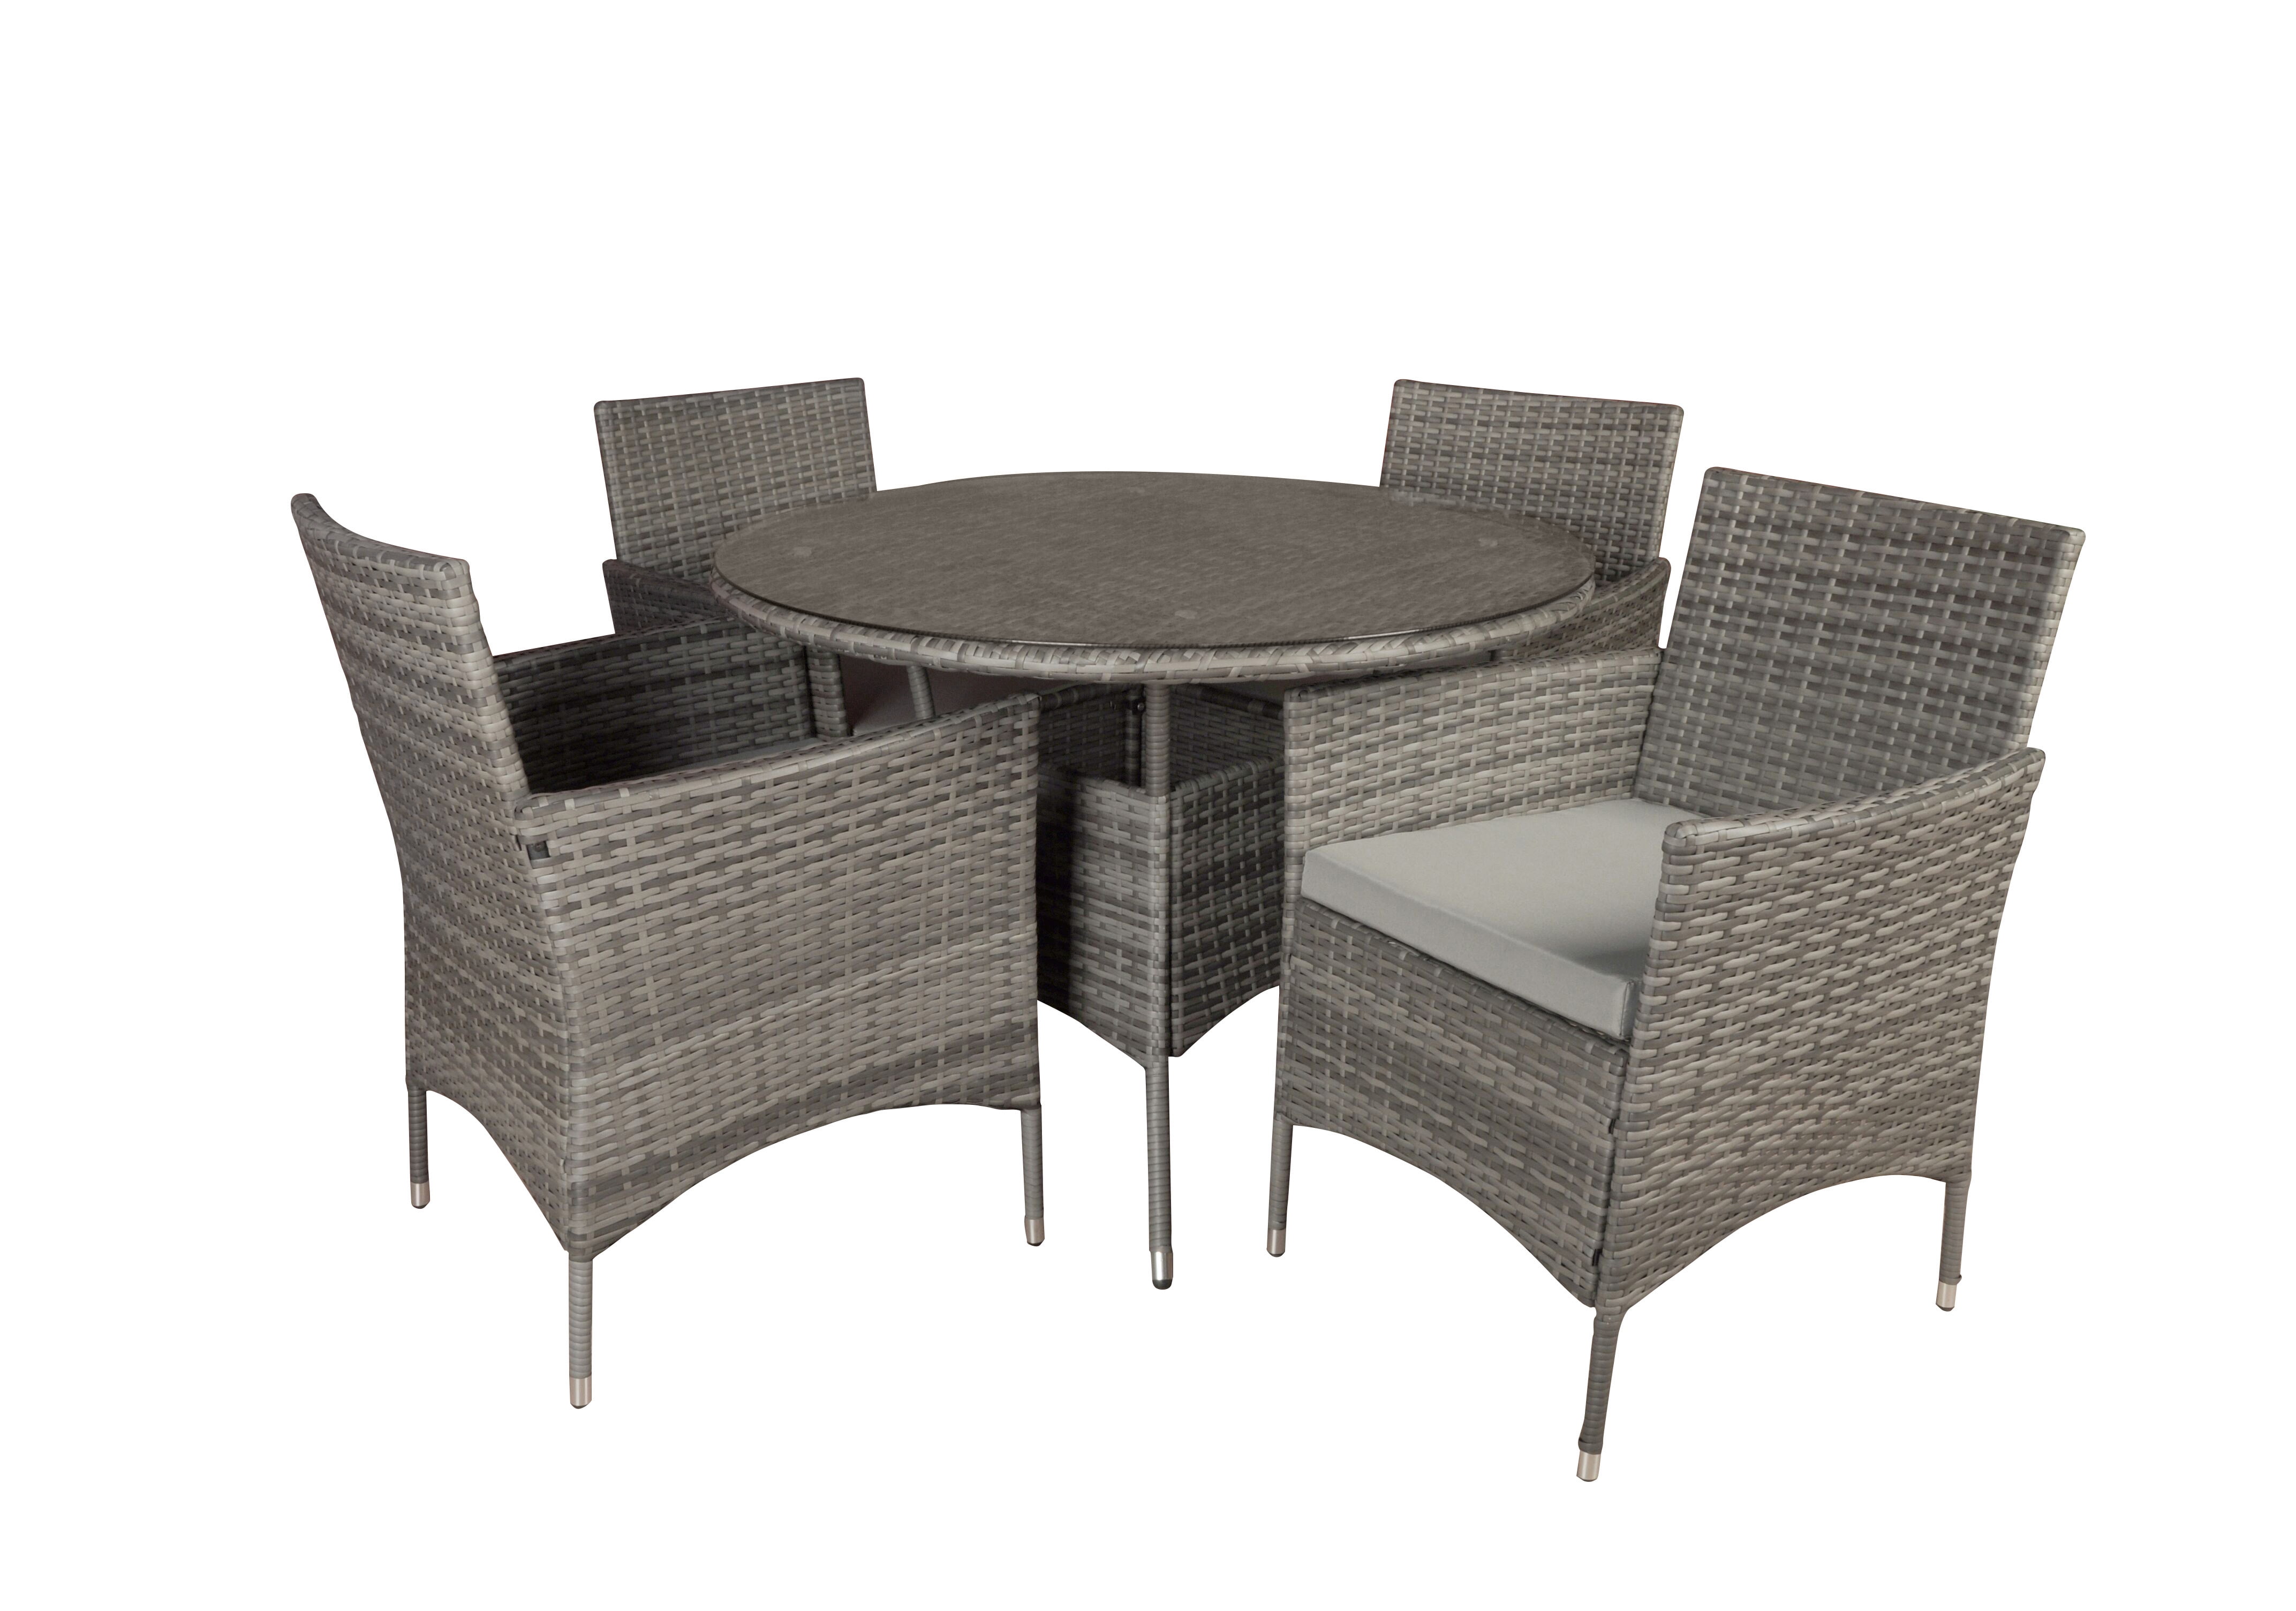 Outdoor Patio Table and Chairs Dining furniture Set (Grey) - Walmart.com